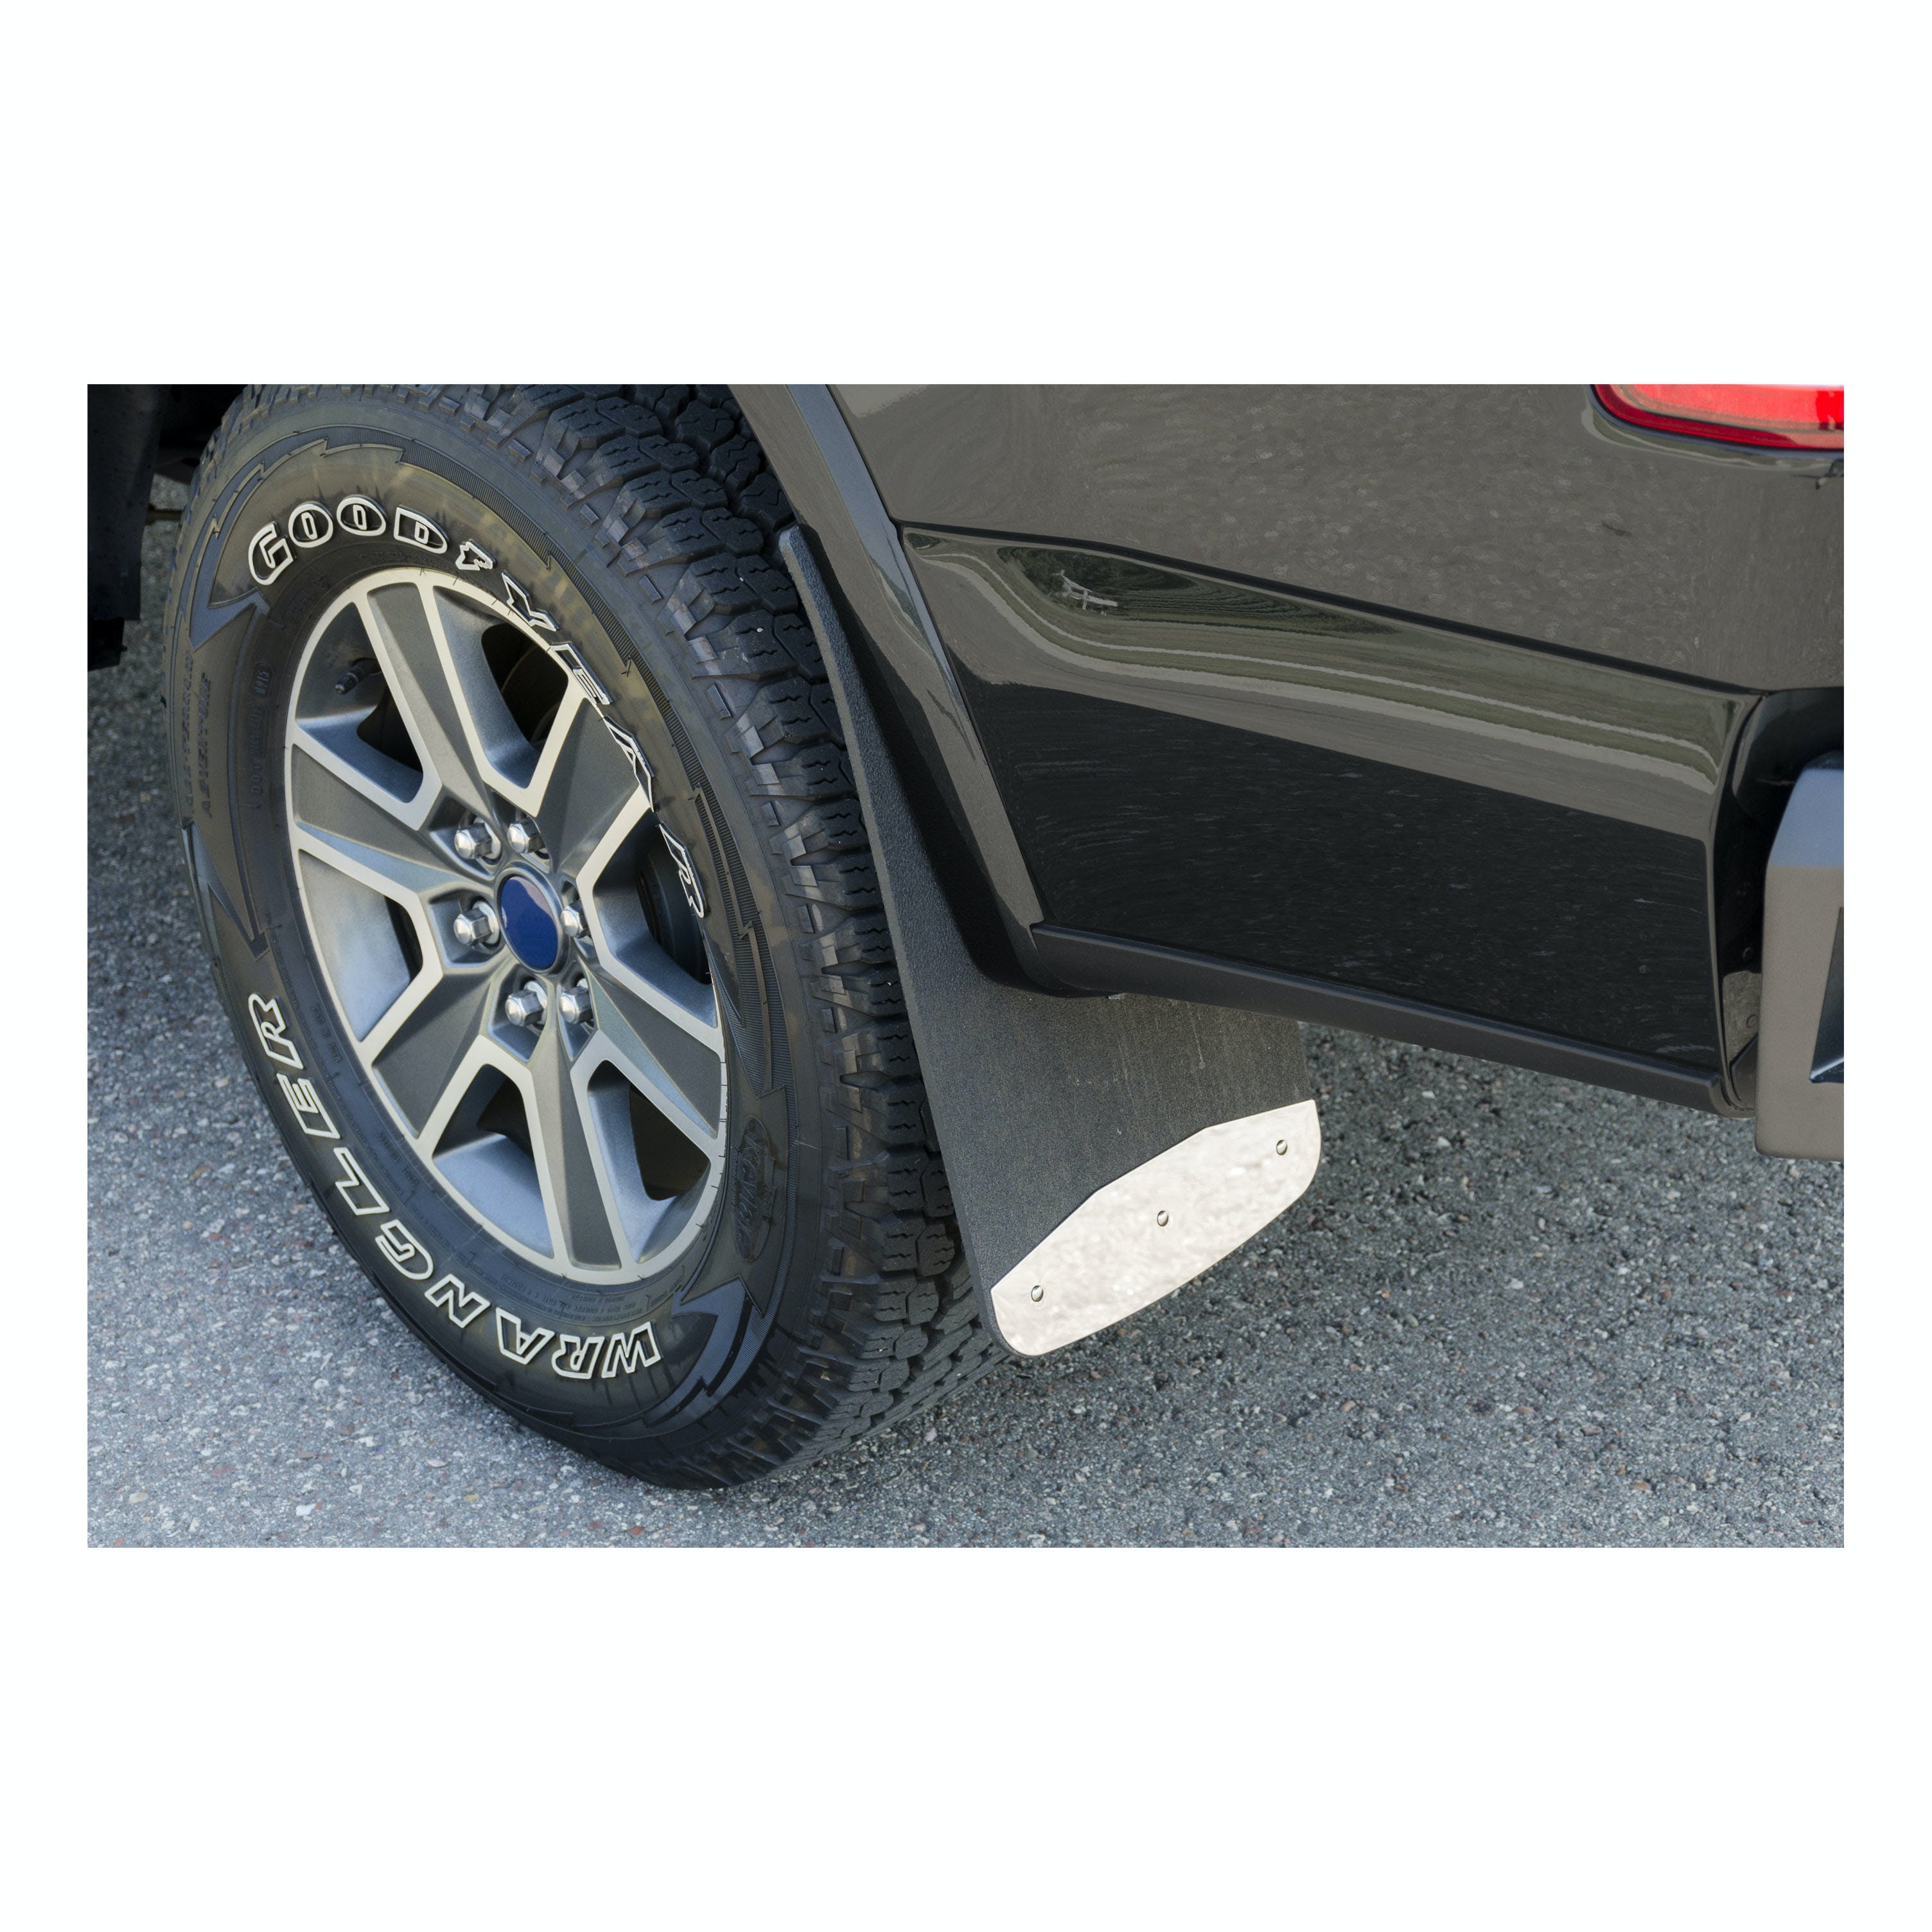 LUVERNE 250930 Textured Rubber Mud Guards